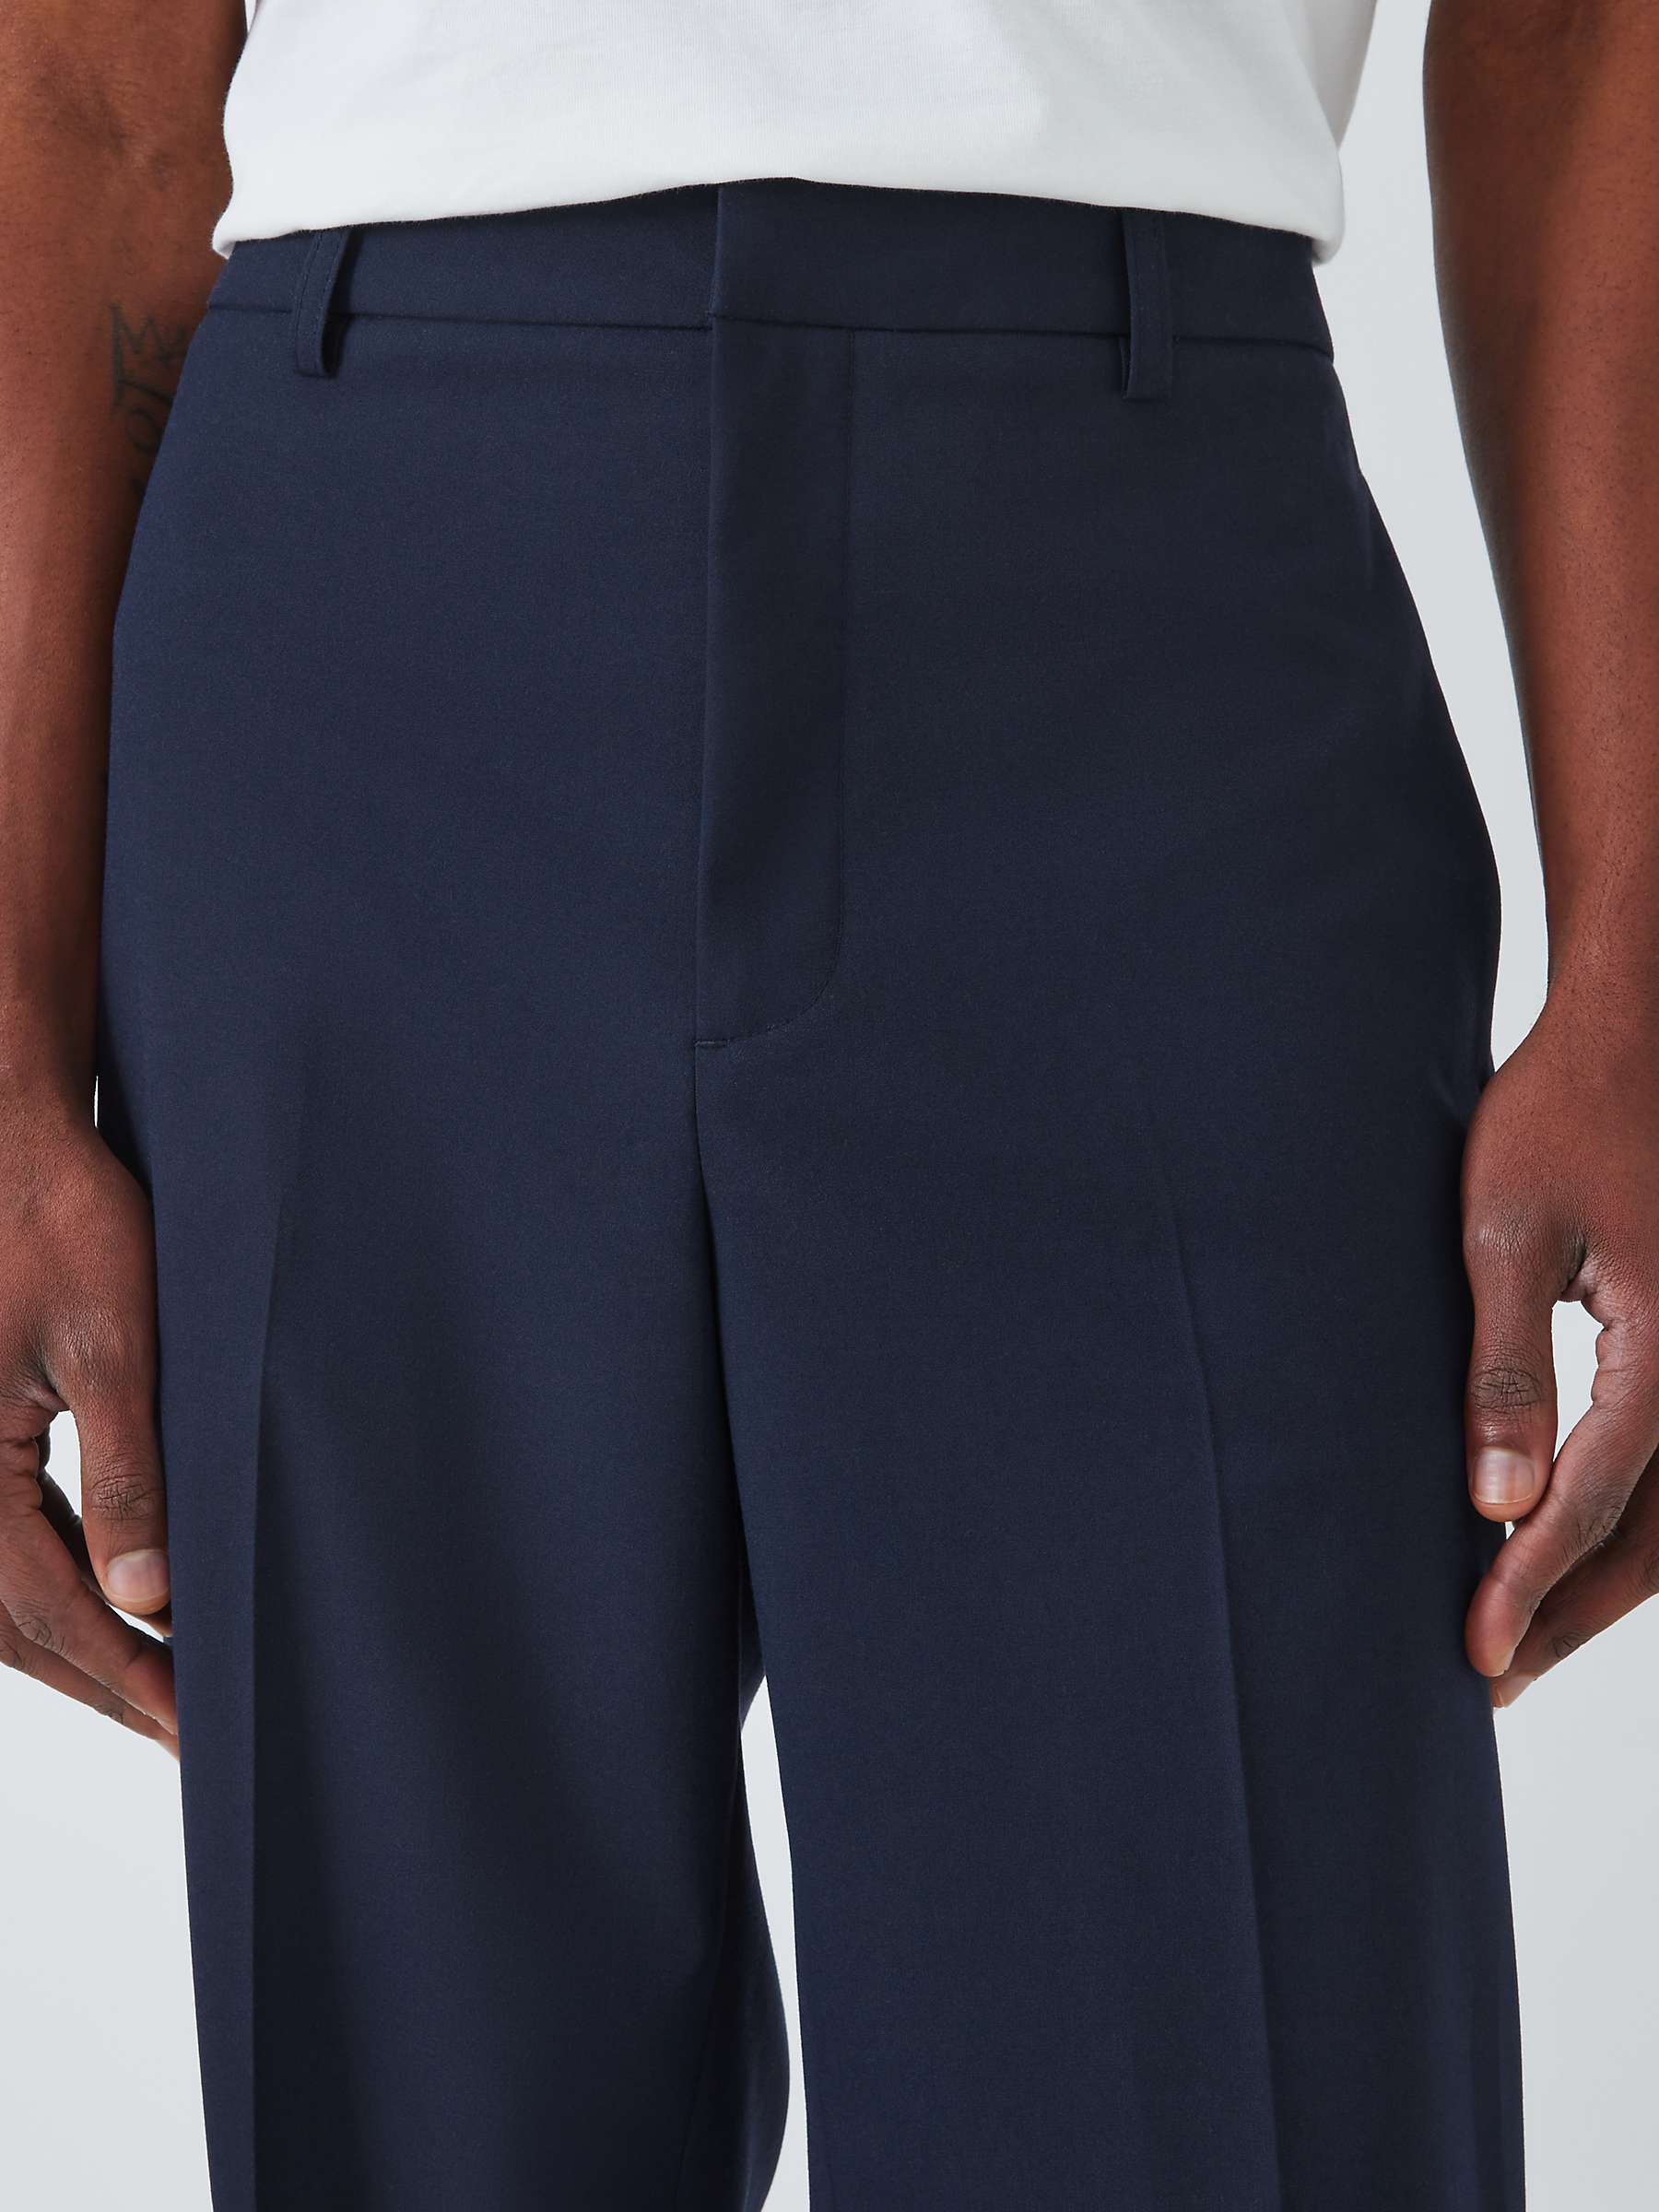 Buy Kin Relaxed Fit Trousers, Dark Navy Online at johnlewis.com